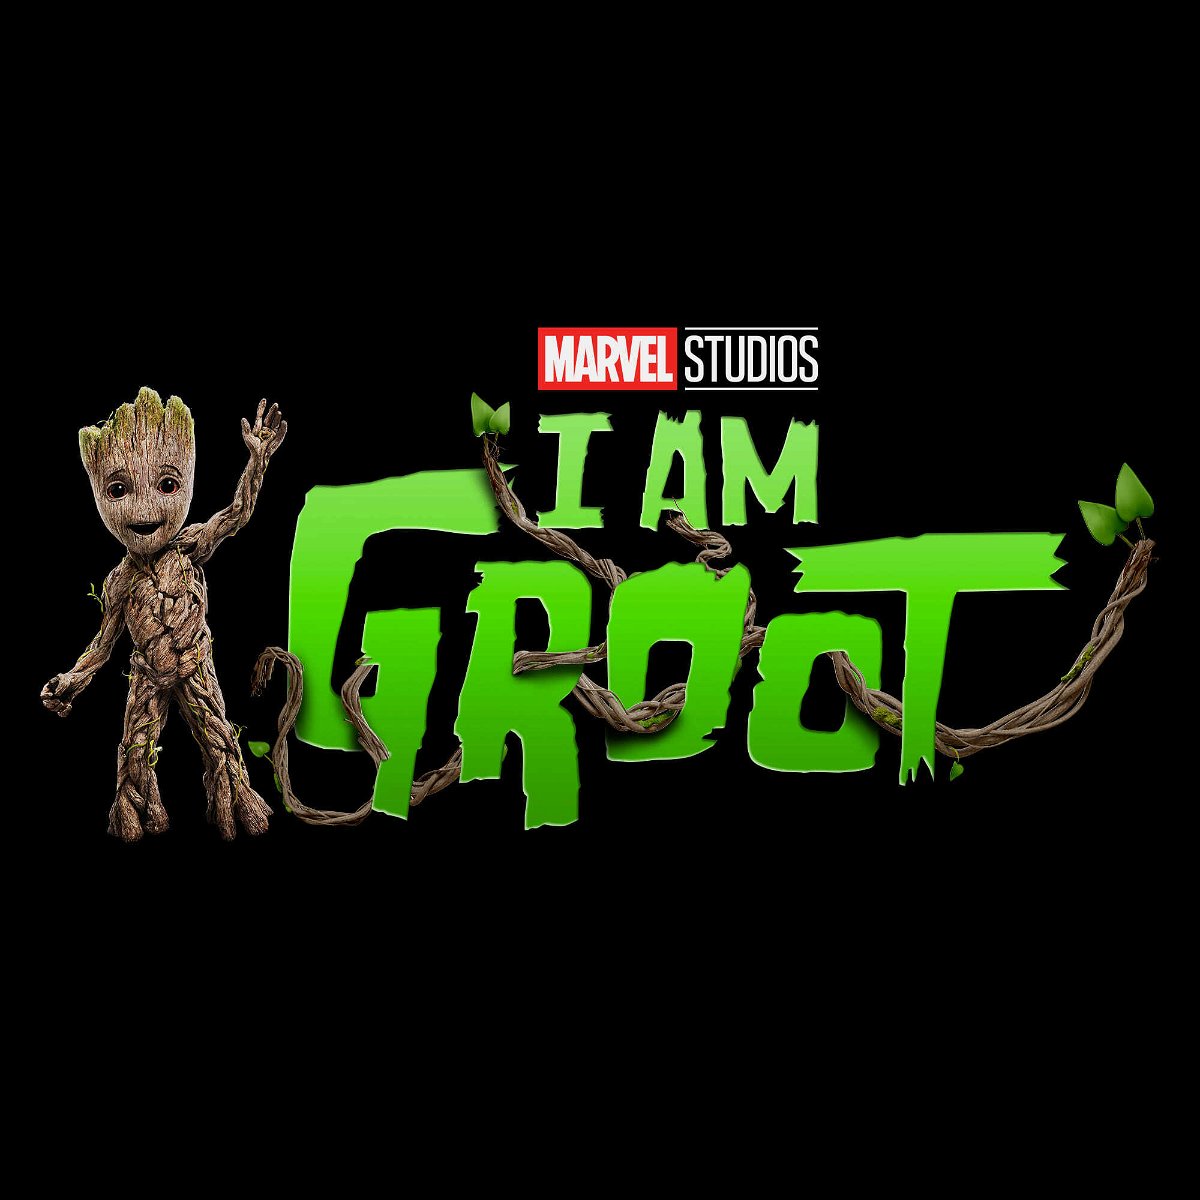 The little Groot